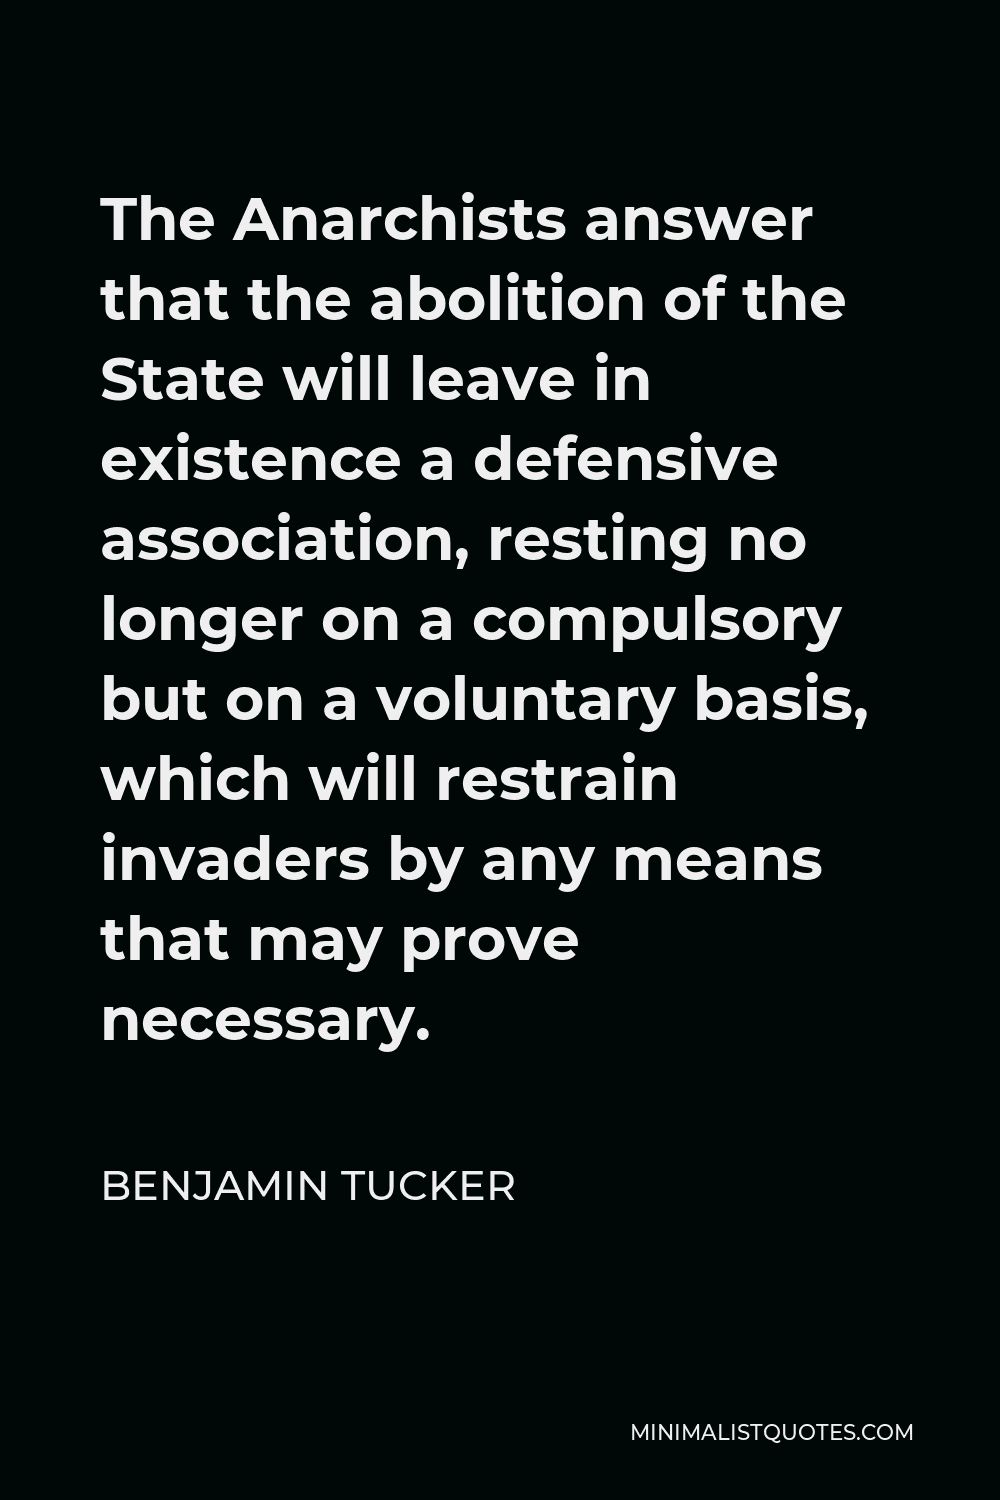 Benjamin Tucker Quote - The Anarchists answer that the abolition of the State will leave in existence a defensive association, resting no longer on a compulsory but on a voluntary basis, which will restrain invaders by any means that may prove necessary.